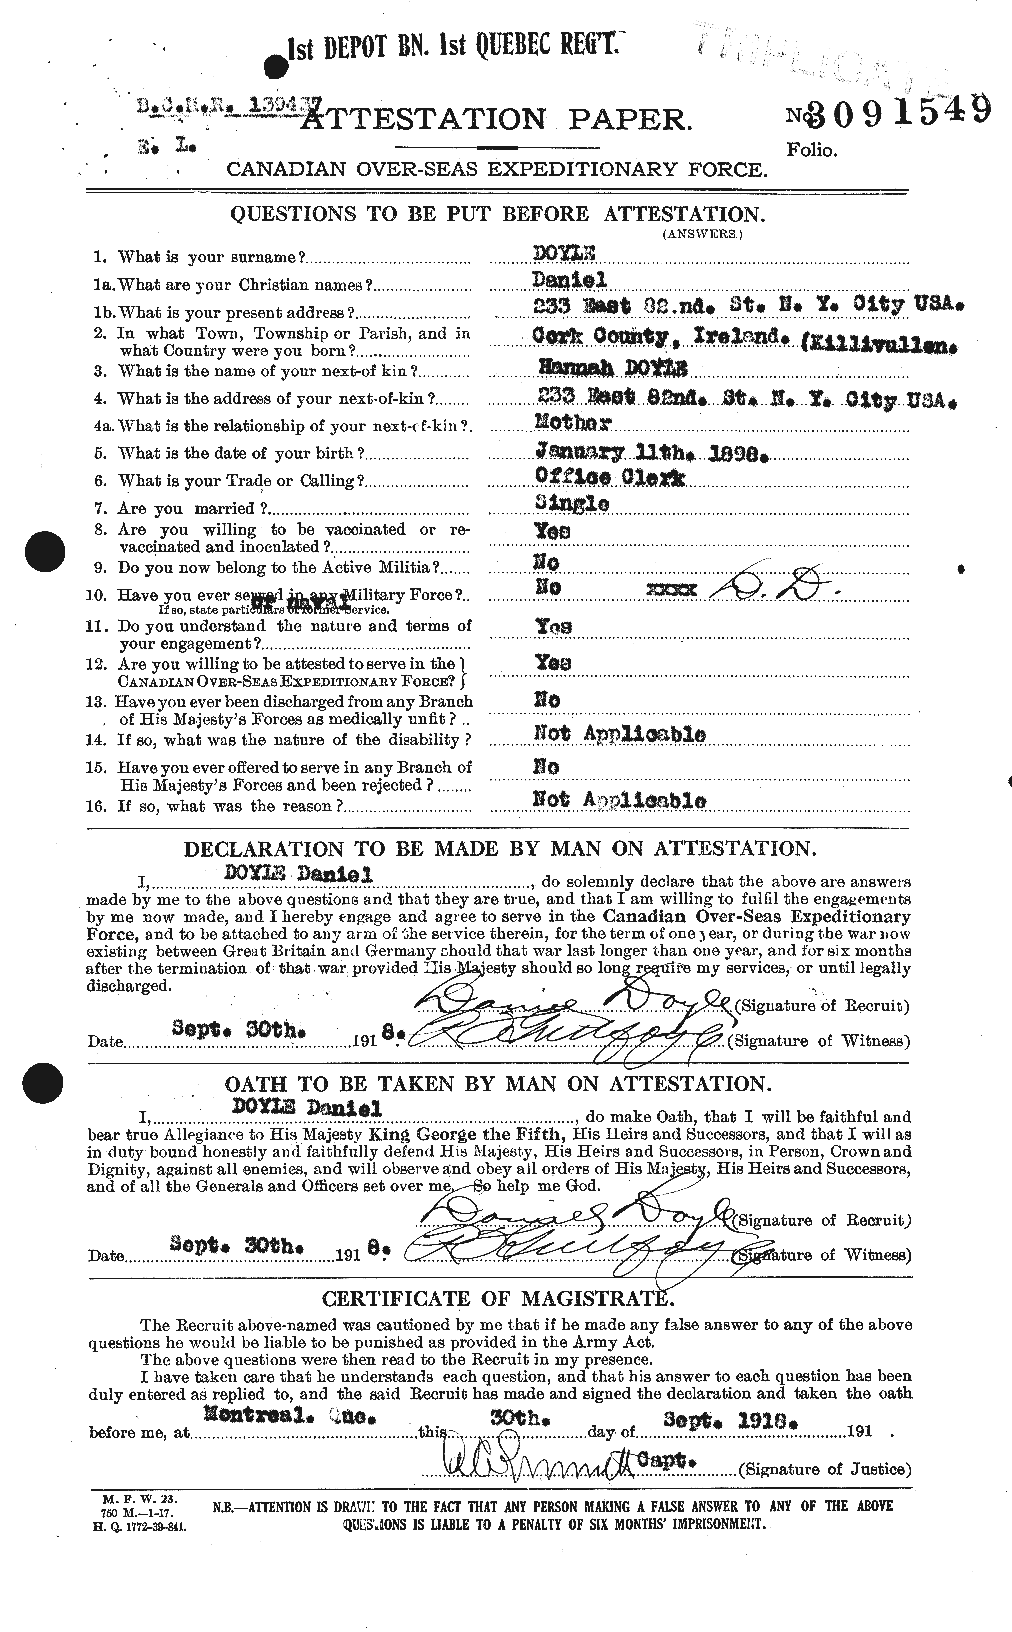 Personnel Records of the First World War - CEF 298445a